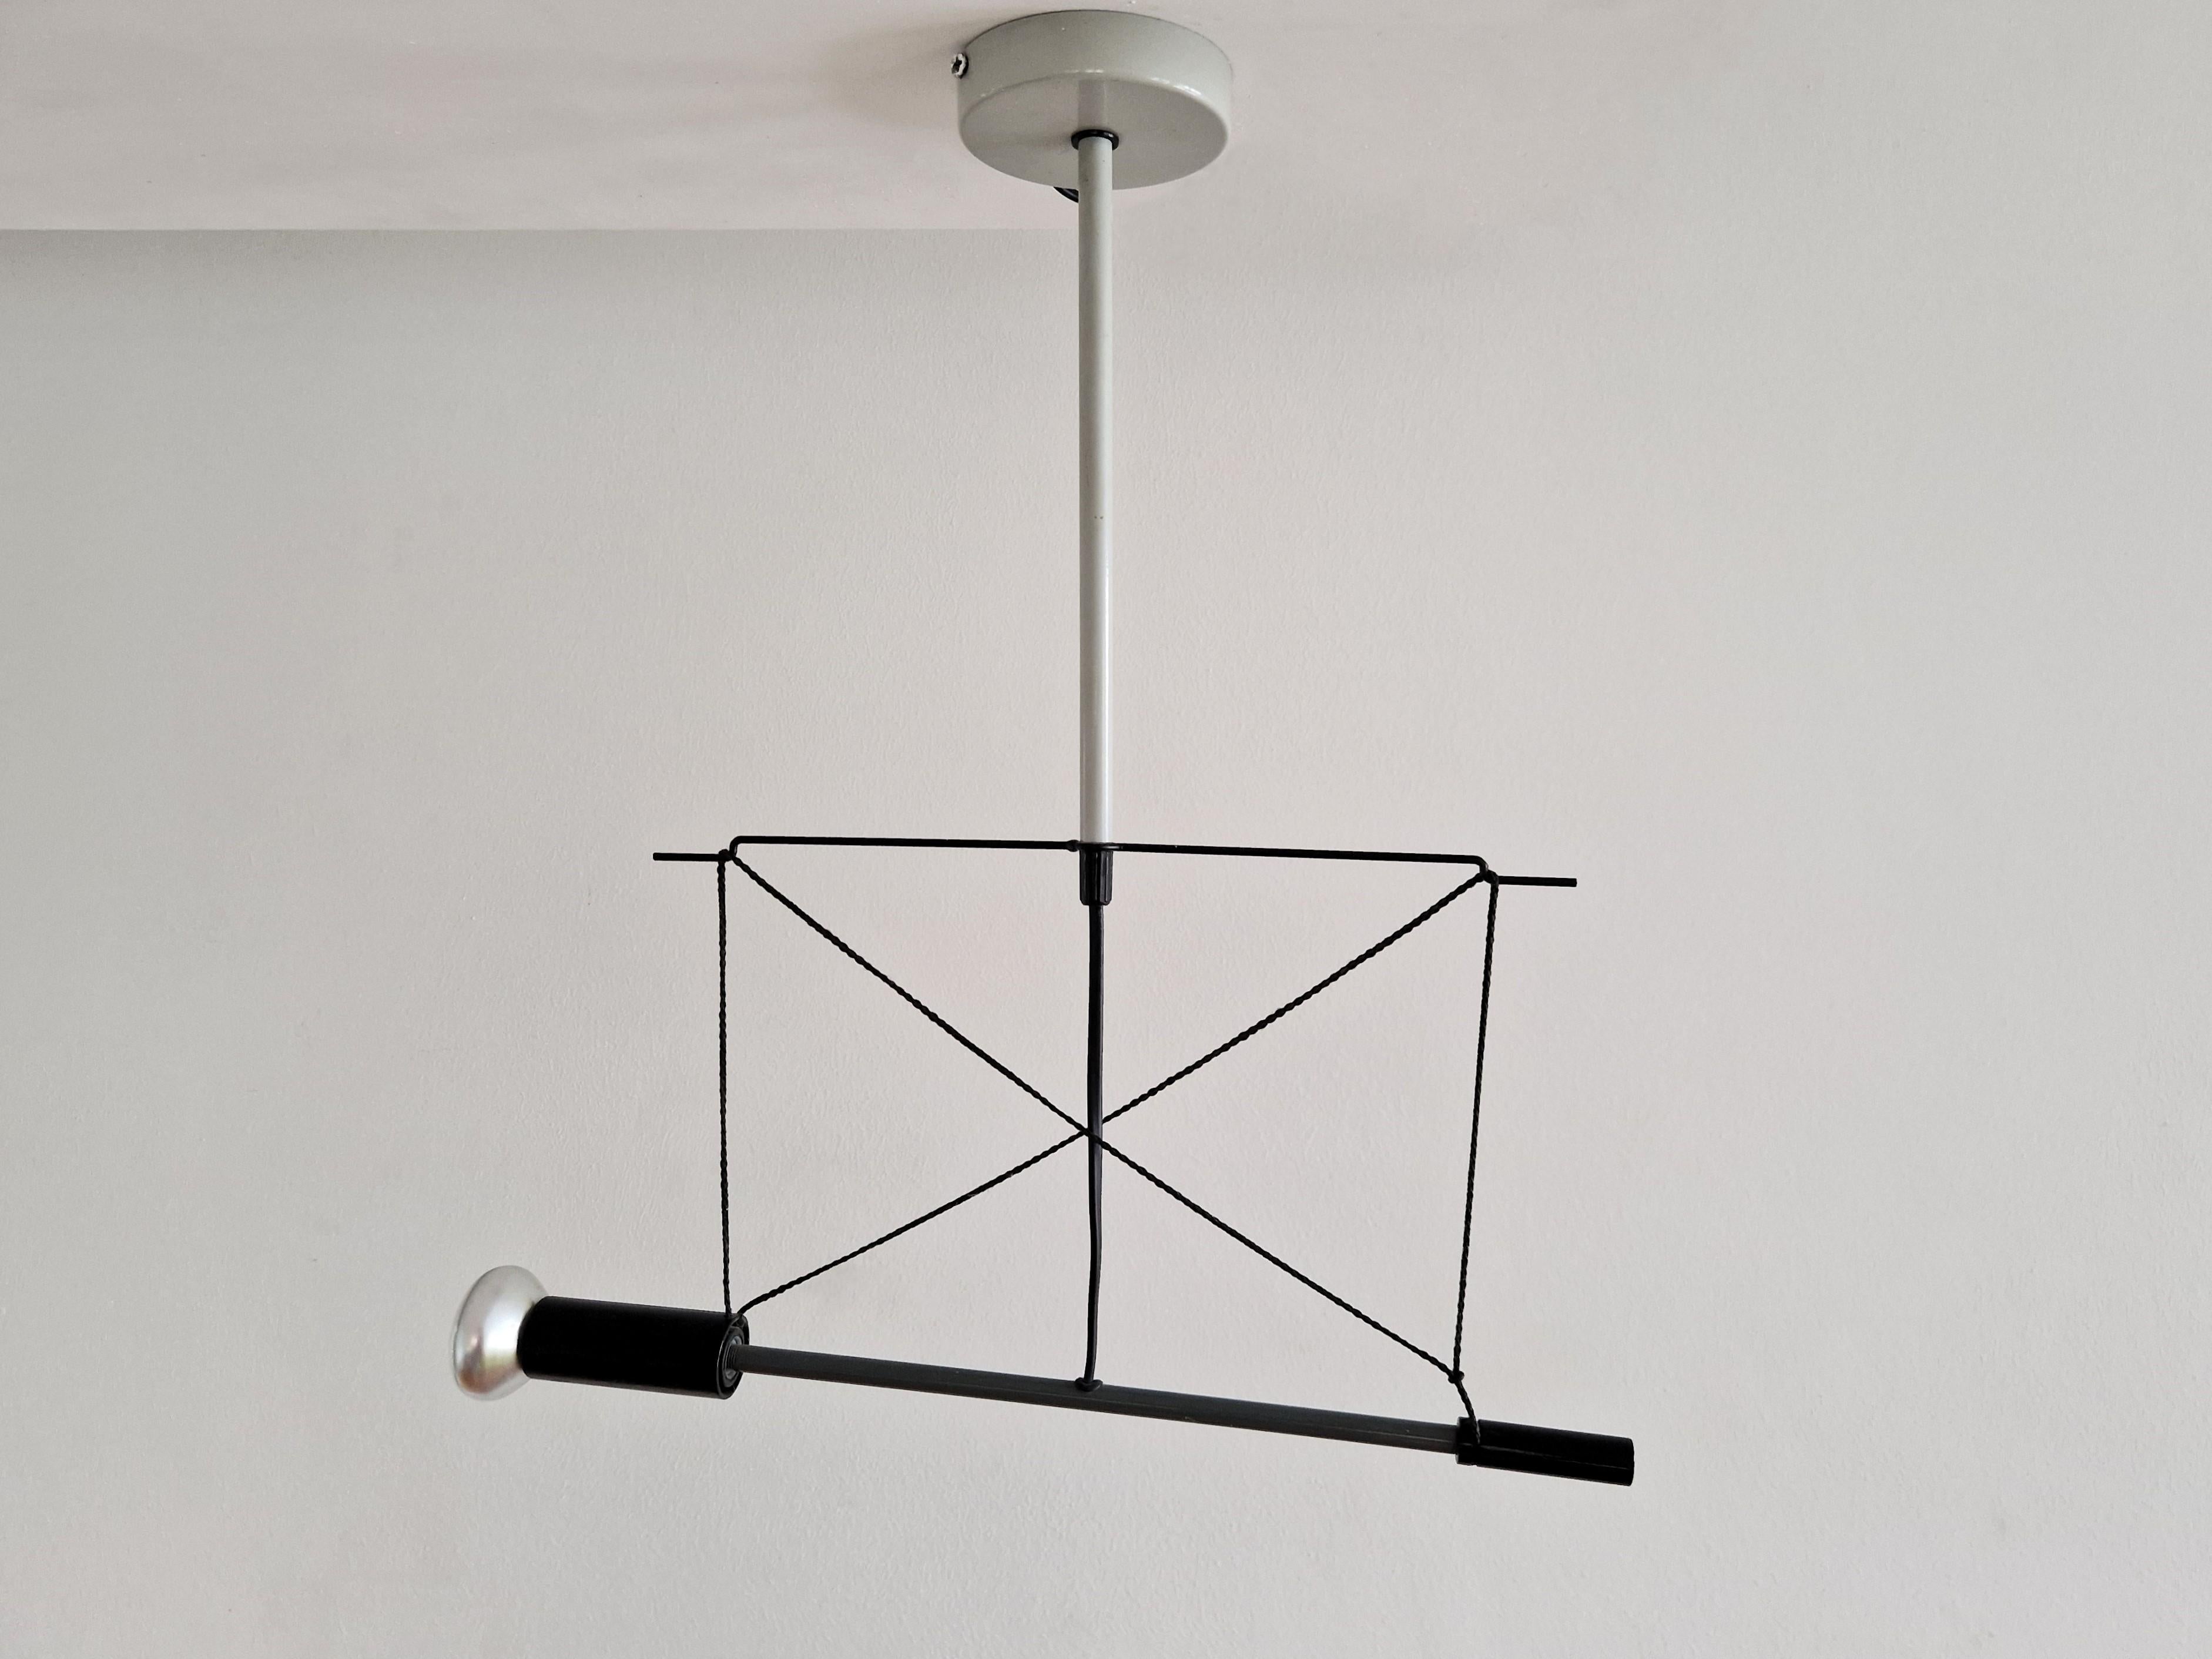 This ceiling lamp, model Spot Torch ST' was designed by Herman Hermsen for Designum in 1982. It is made out of grey lacquered steel with black accents, aluminum and nylon rope that provides the adjustability of the light. A great piece for